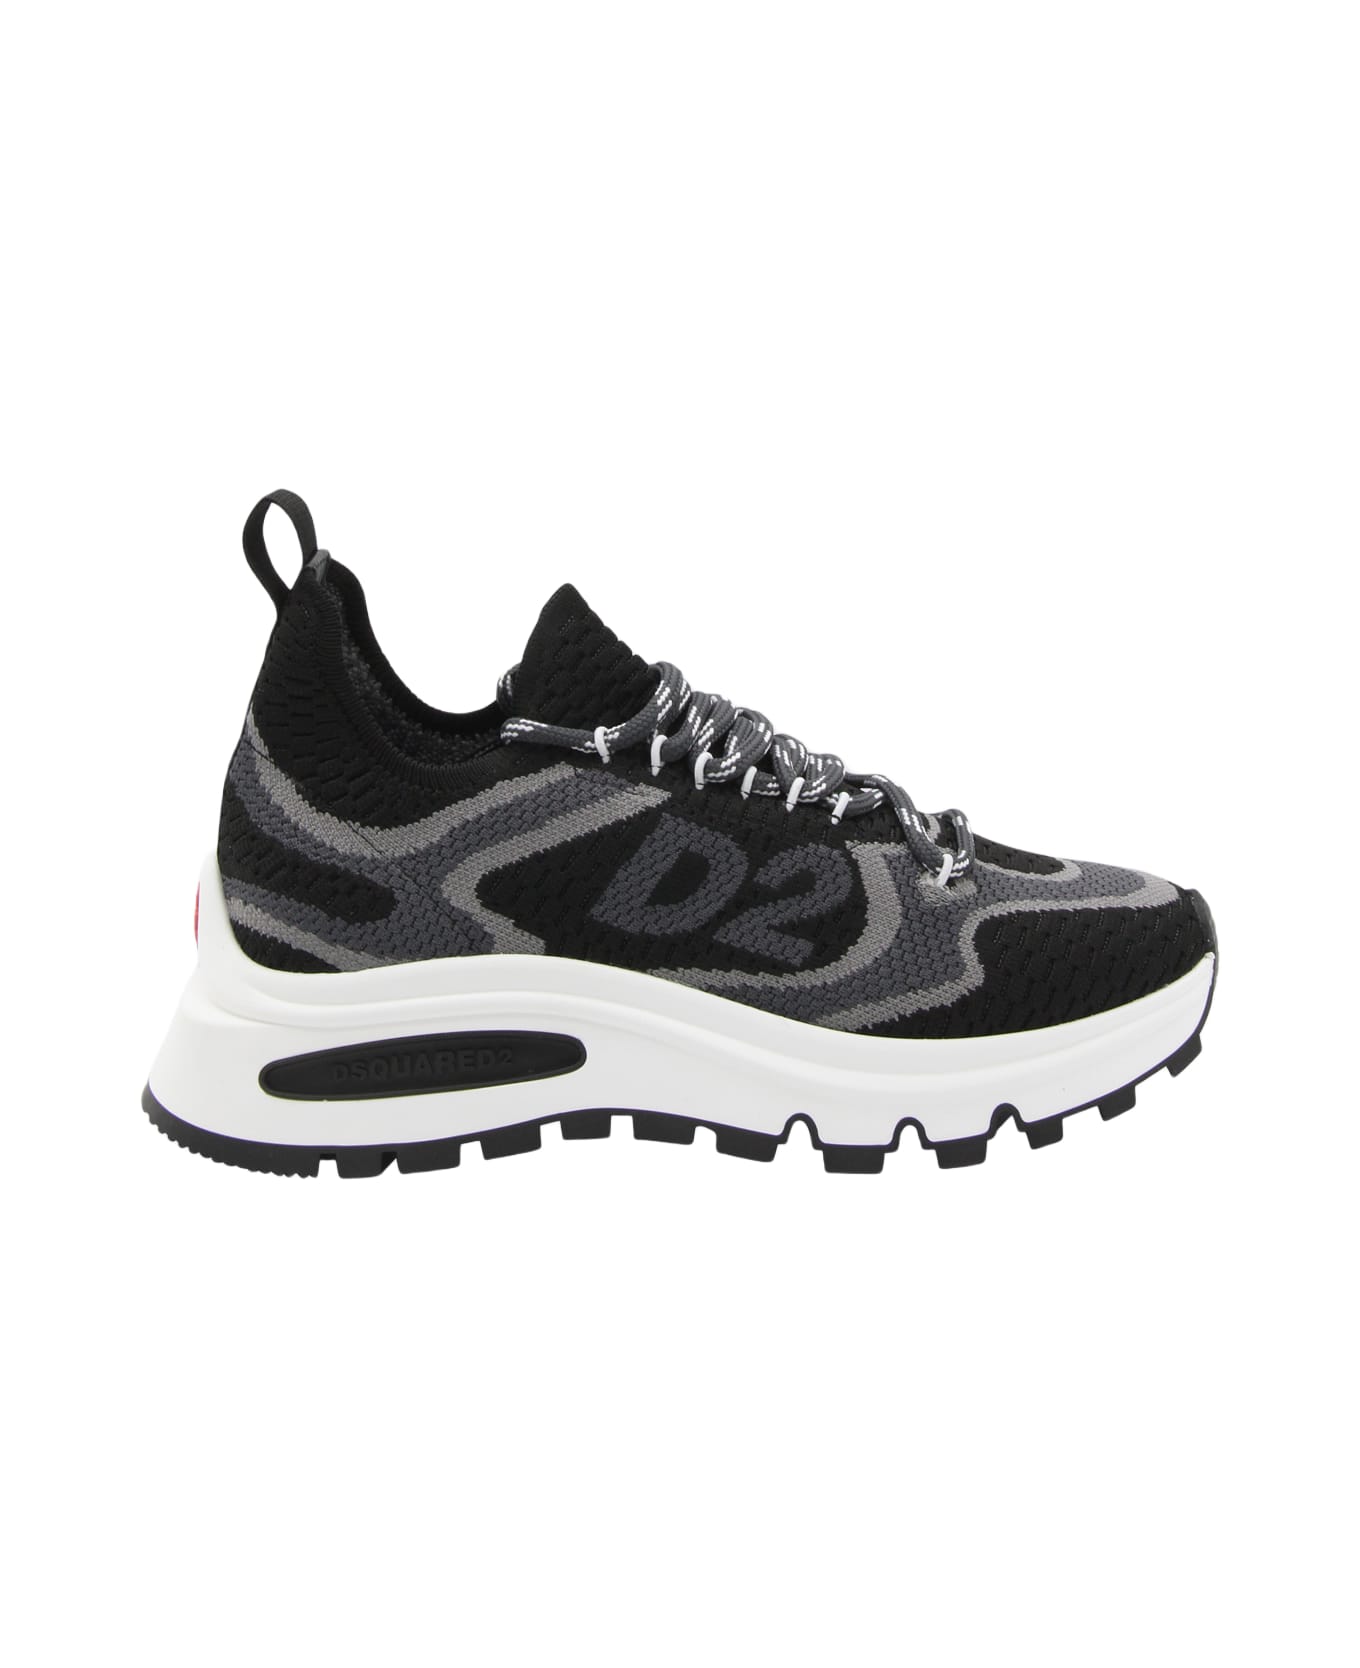 Dsquared2 Black Leather Sneakers - Black/grey スニーカー